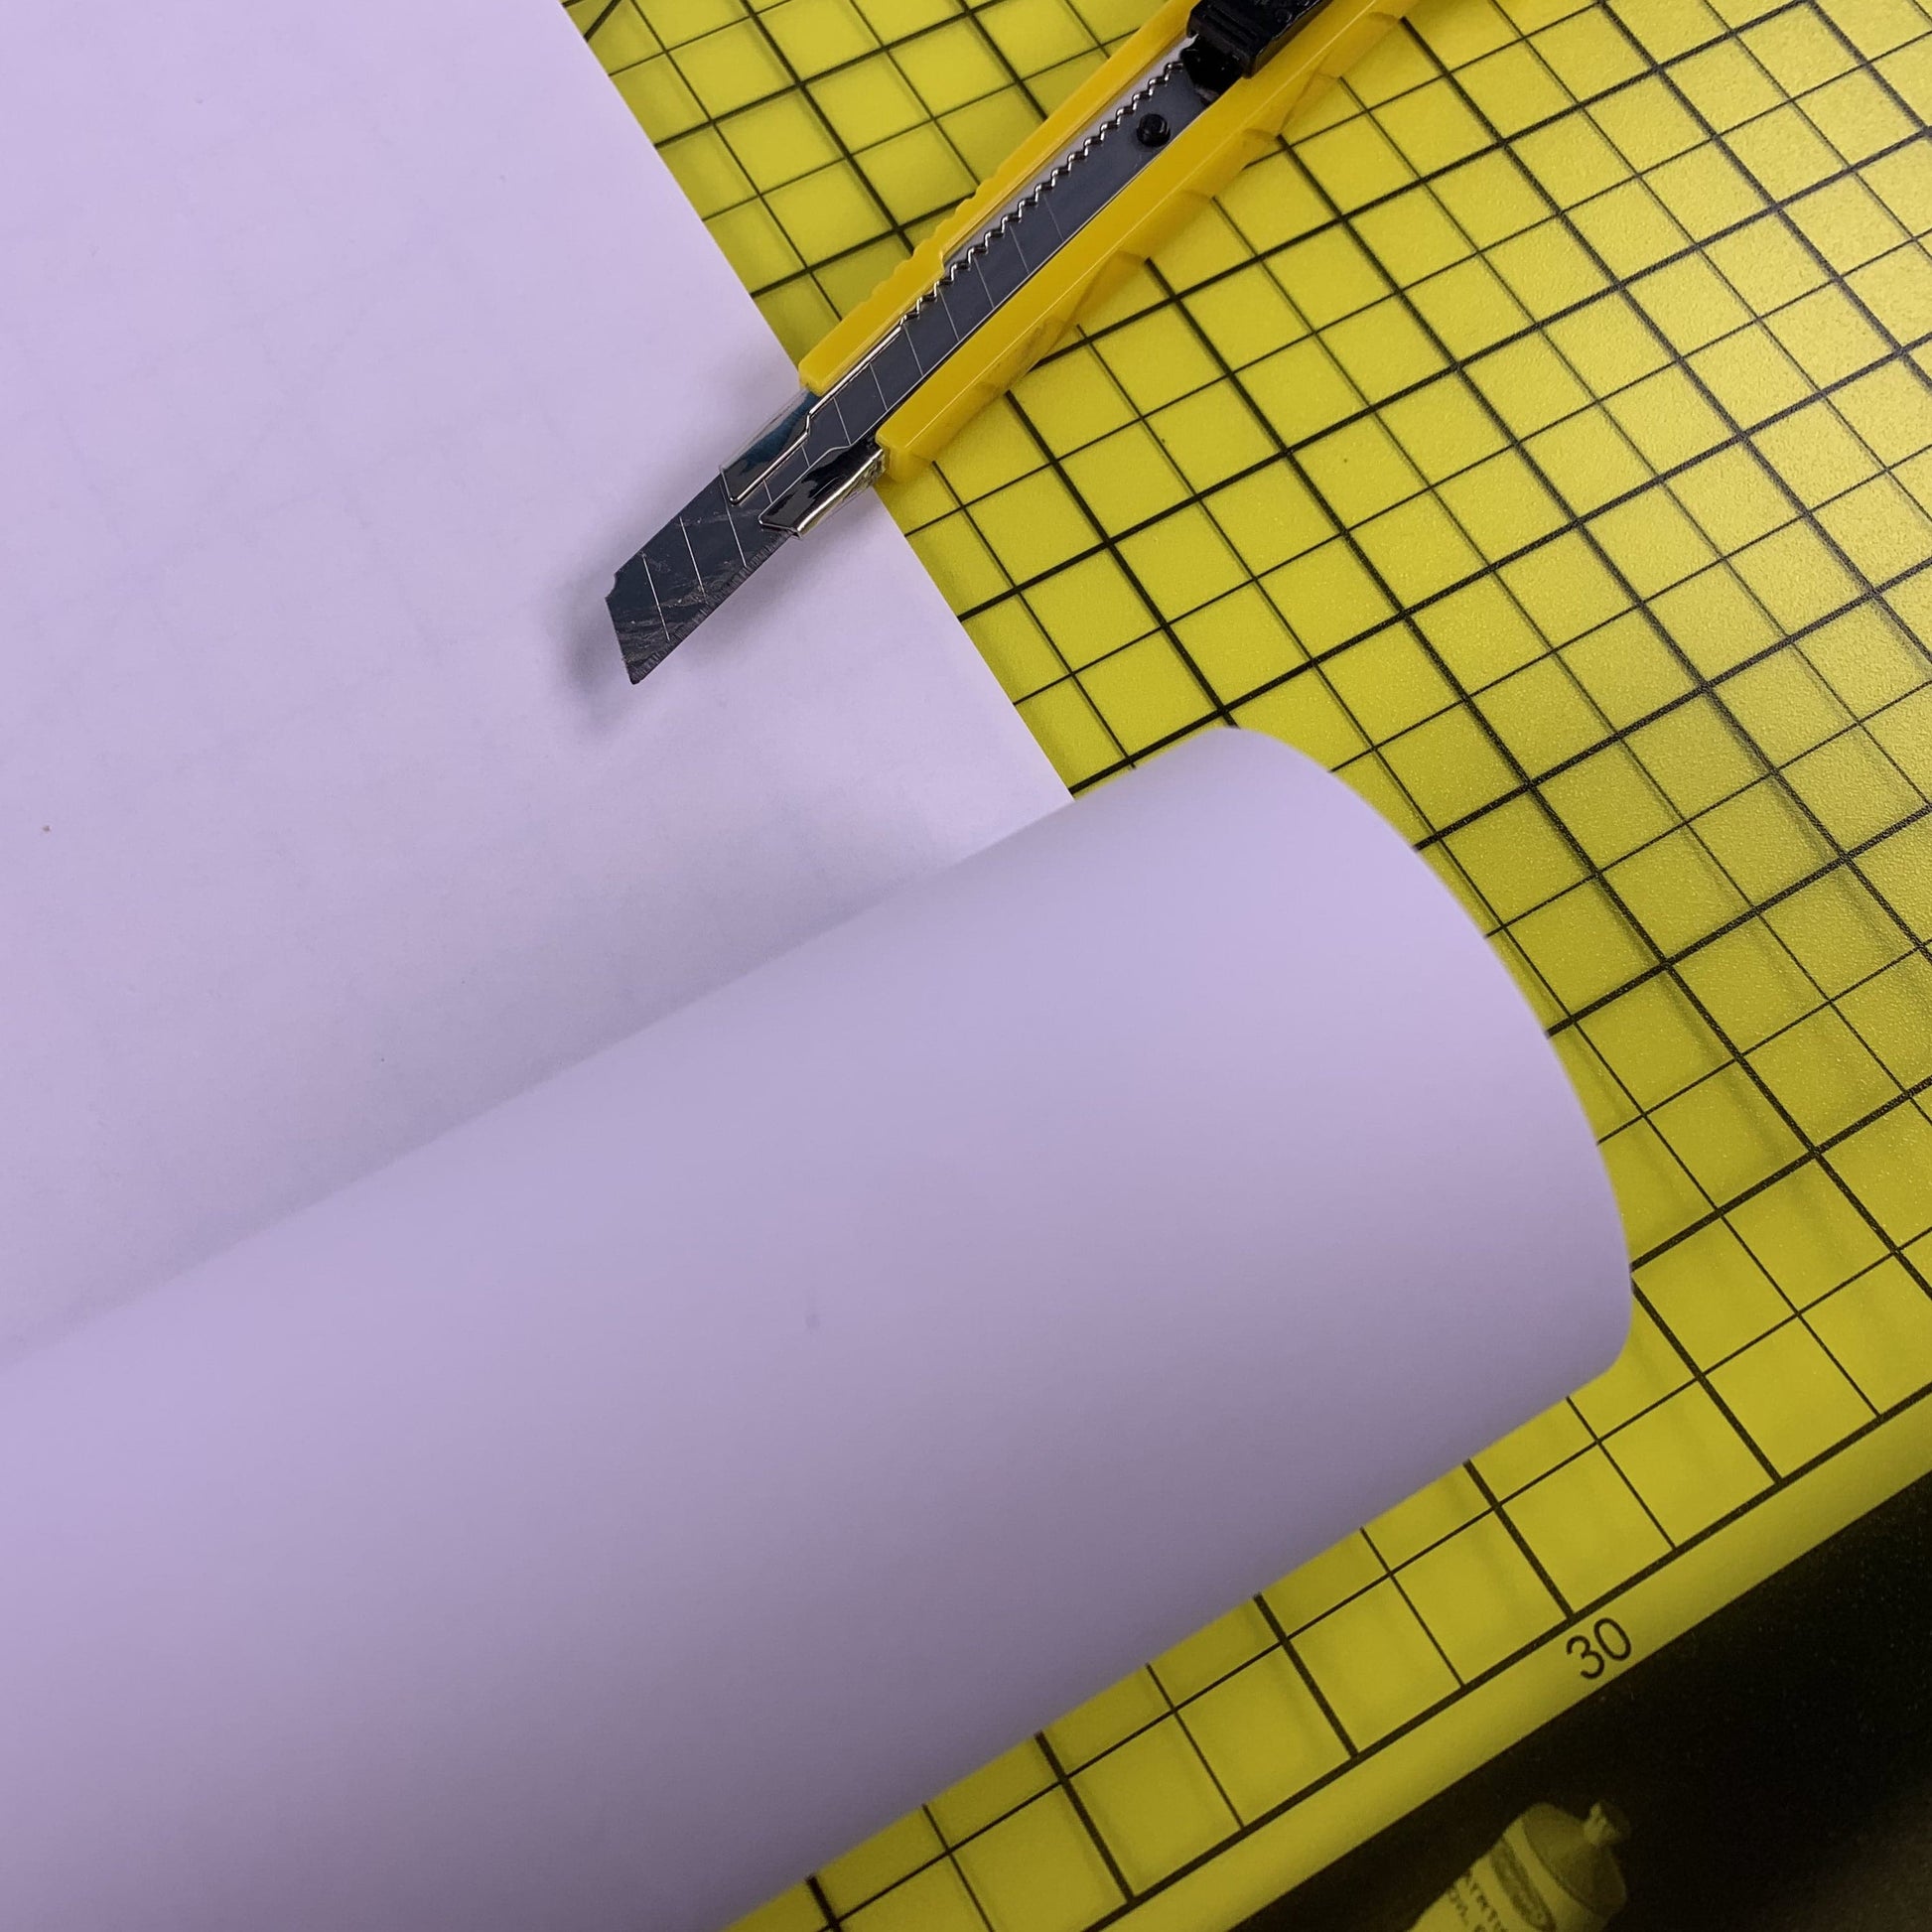 knife against drawing roll